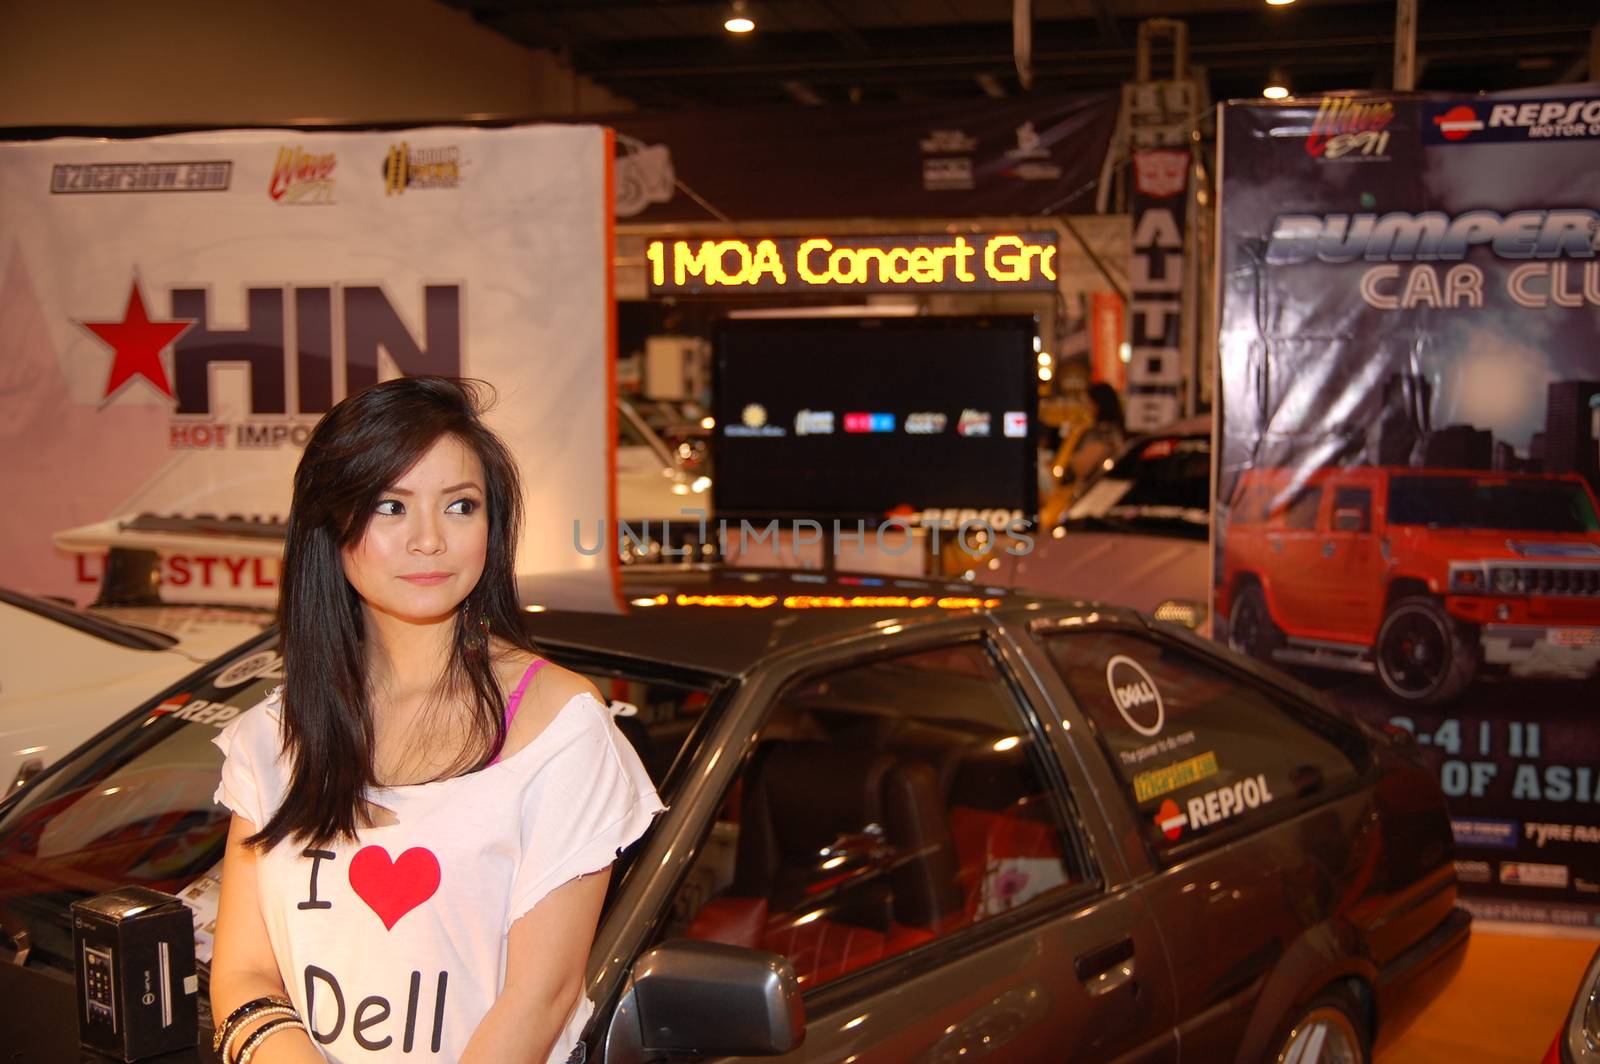 PASAY, PH - NOV 27: Car show female model at Manila Auto Salon on November 27, 2011 in SMX Convention Center, Pasay, Philippines.